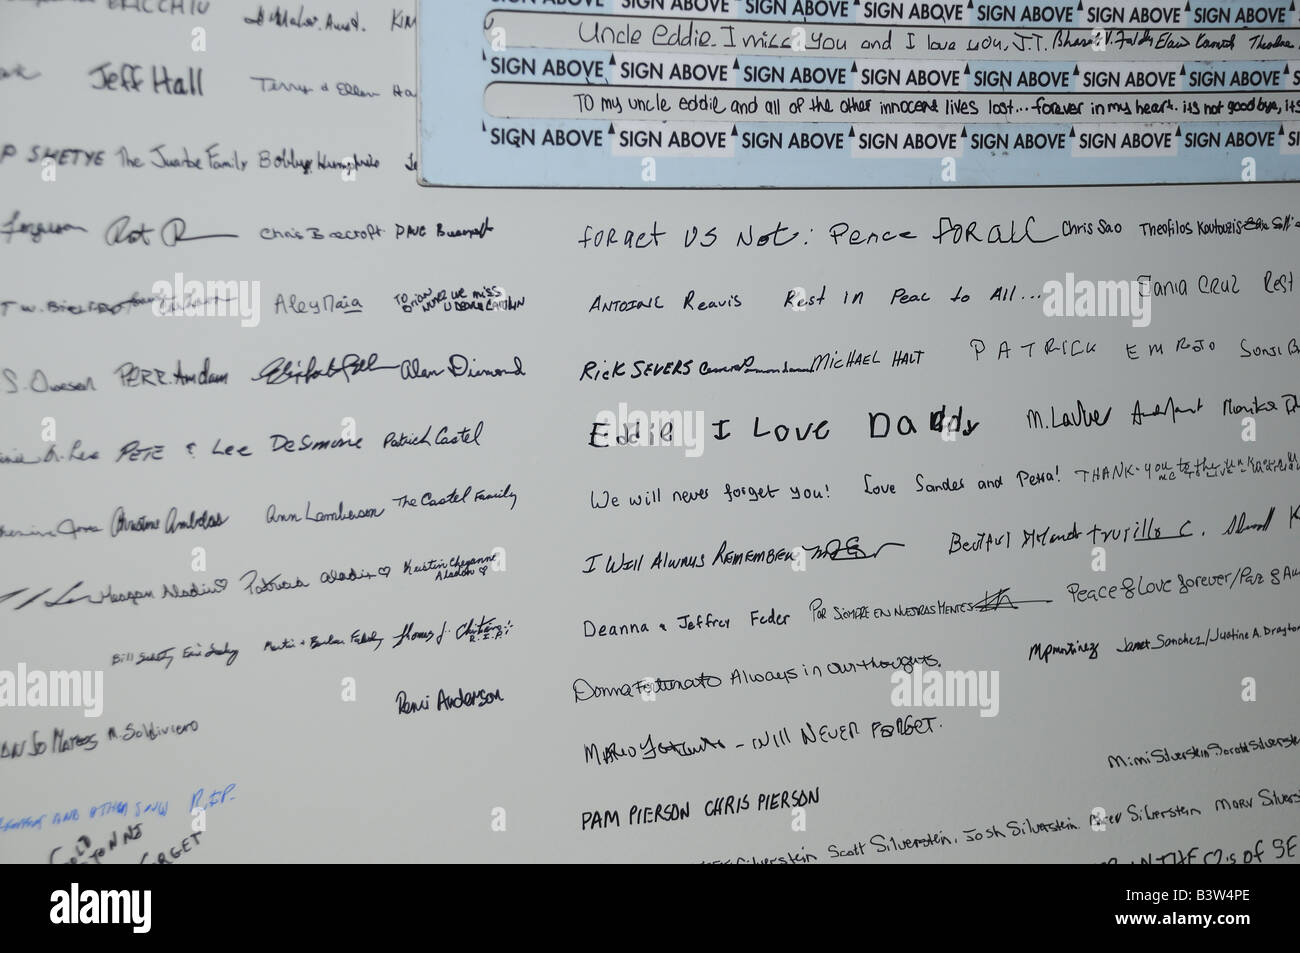 Messages and signatures on a steel beam that will be part of a memorial to victims of the World Trade Center attack in 2001. Stock Photo